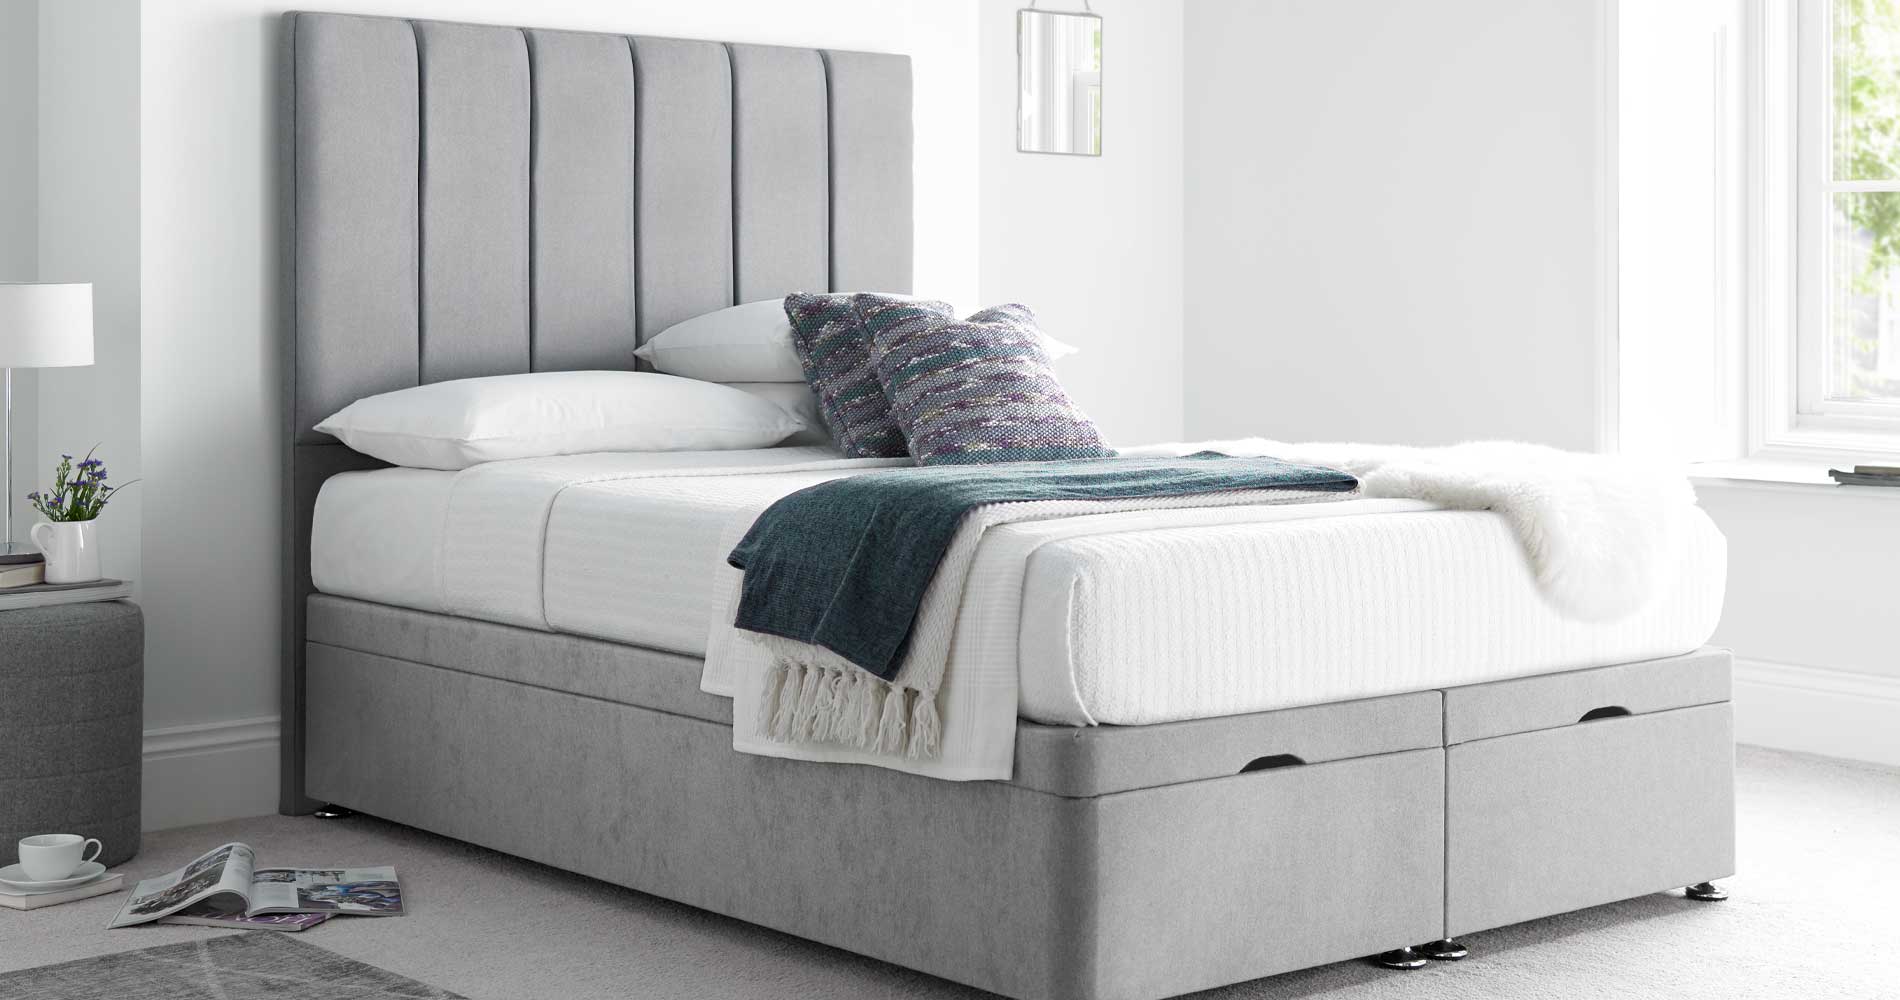 Double Beds on Pepperfry: Find Double Beds for a Single Price